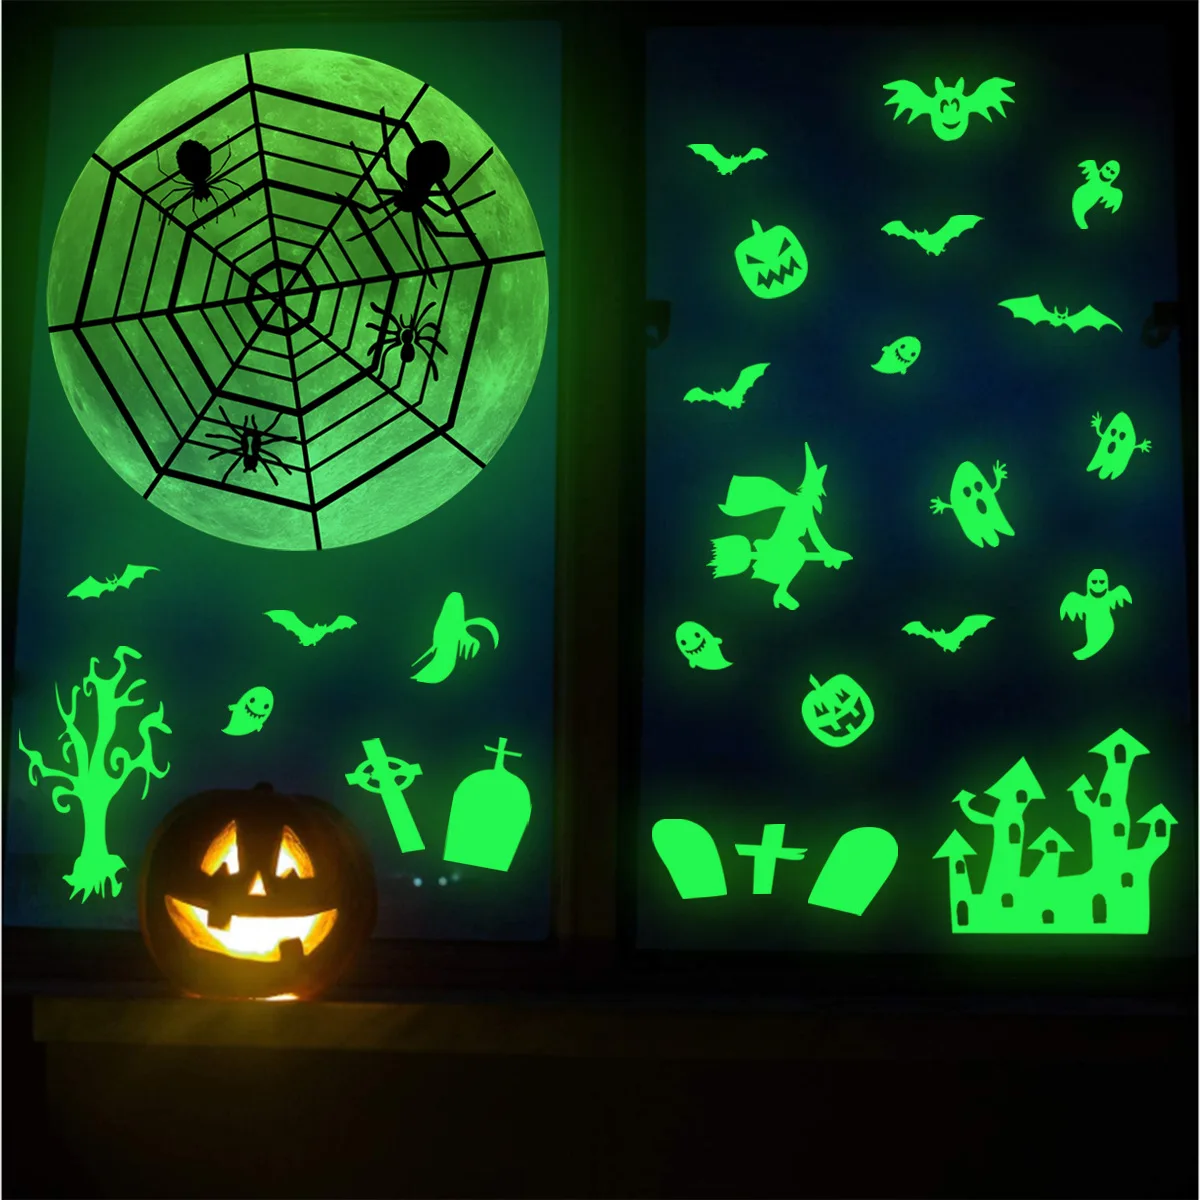 

Halloween Party Decoration Luminous Sticker Witch Bat Ghost Spider Web Horror Glow In The Dark Wall Sticker Kids Room Wall Decal